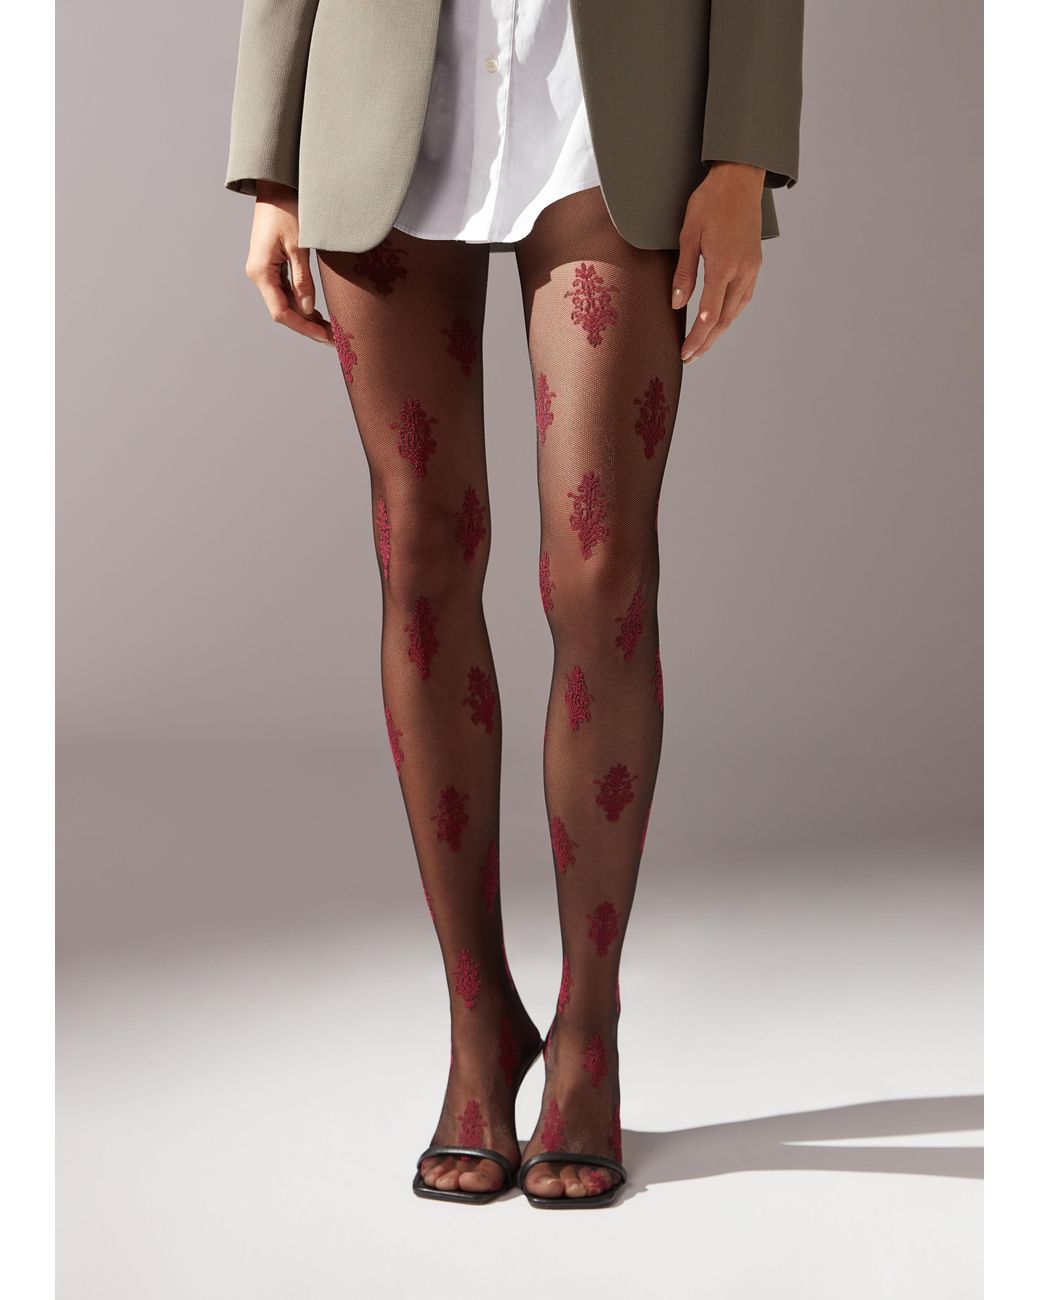 Calzedonia Baroque Floral Pattern 40 Denier Sheer Tights in White